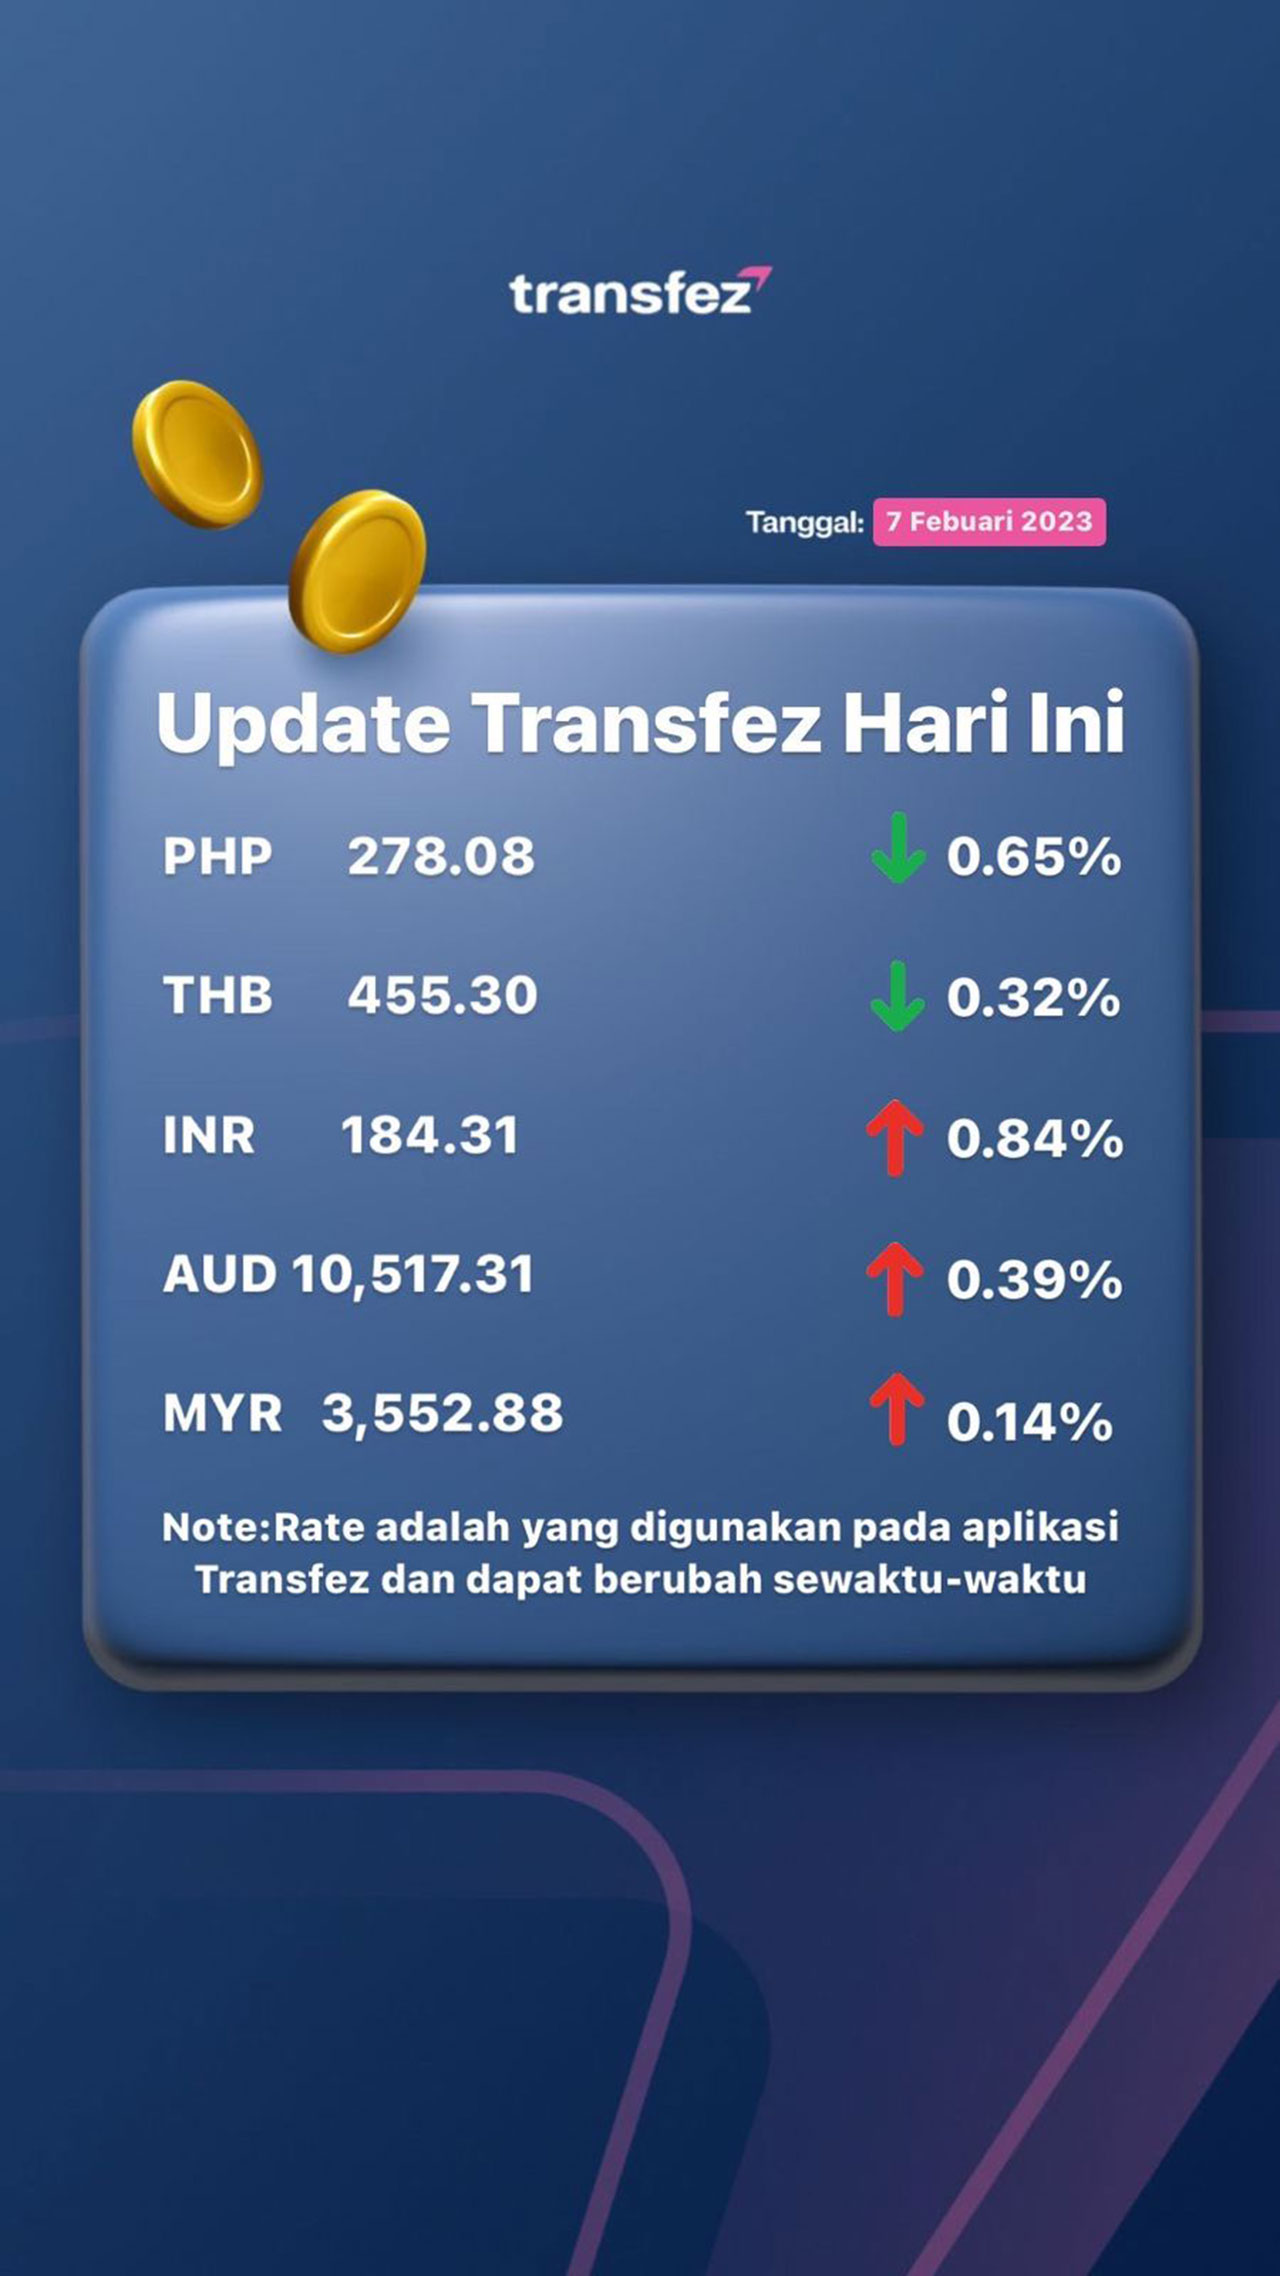 Today's Transfez Rate Update February 06 2023